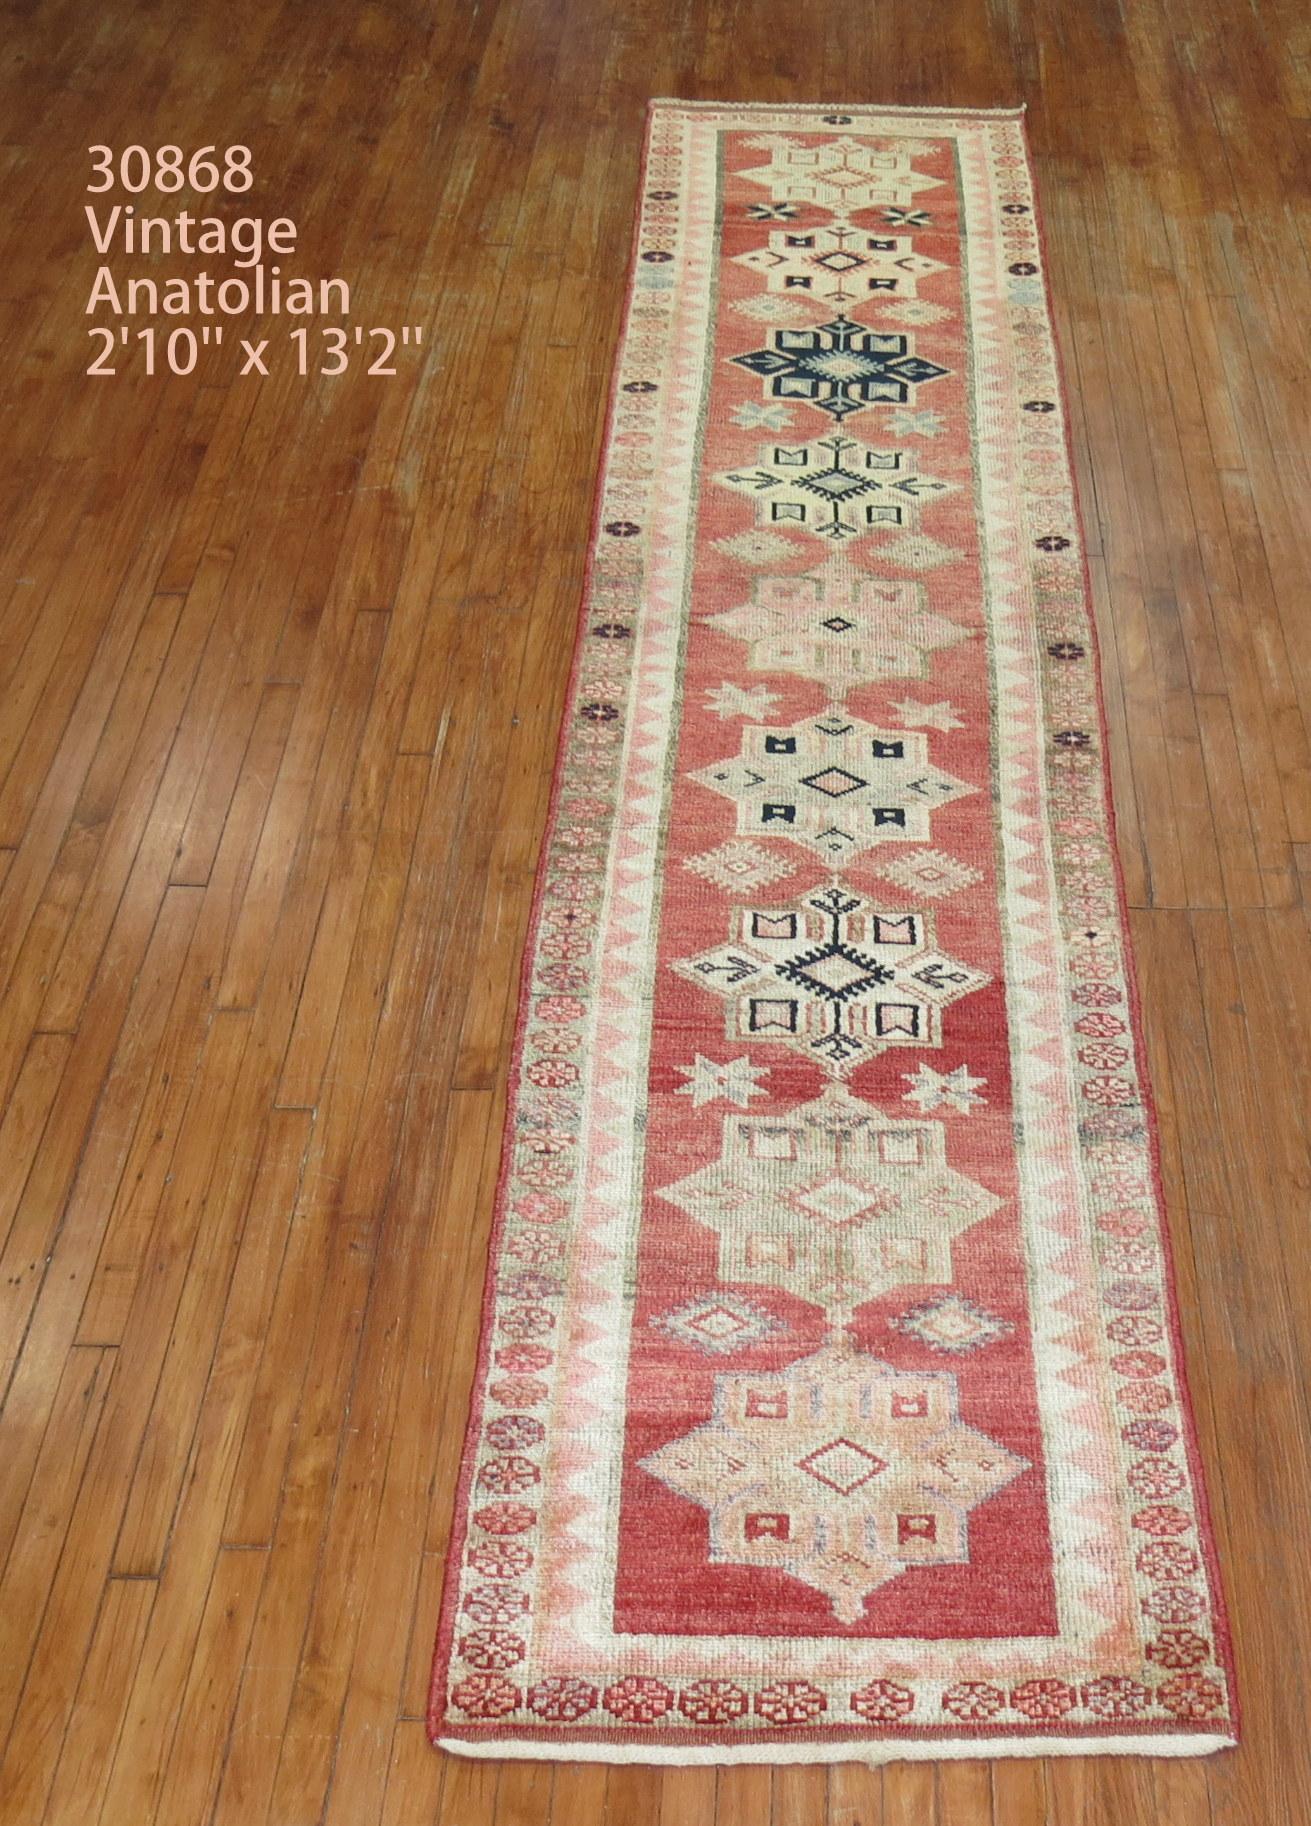 Mid 20th century Turkish Anatolian runner with a traditional multi medallion and border design

Measures: 2'10'' x 13'2''.